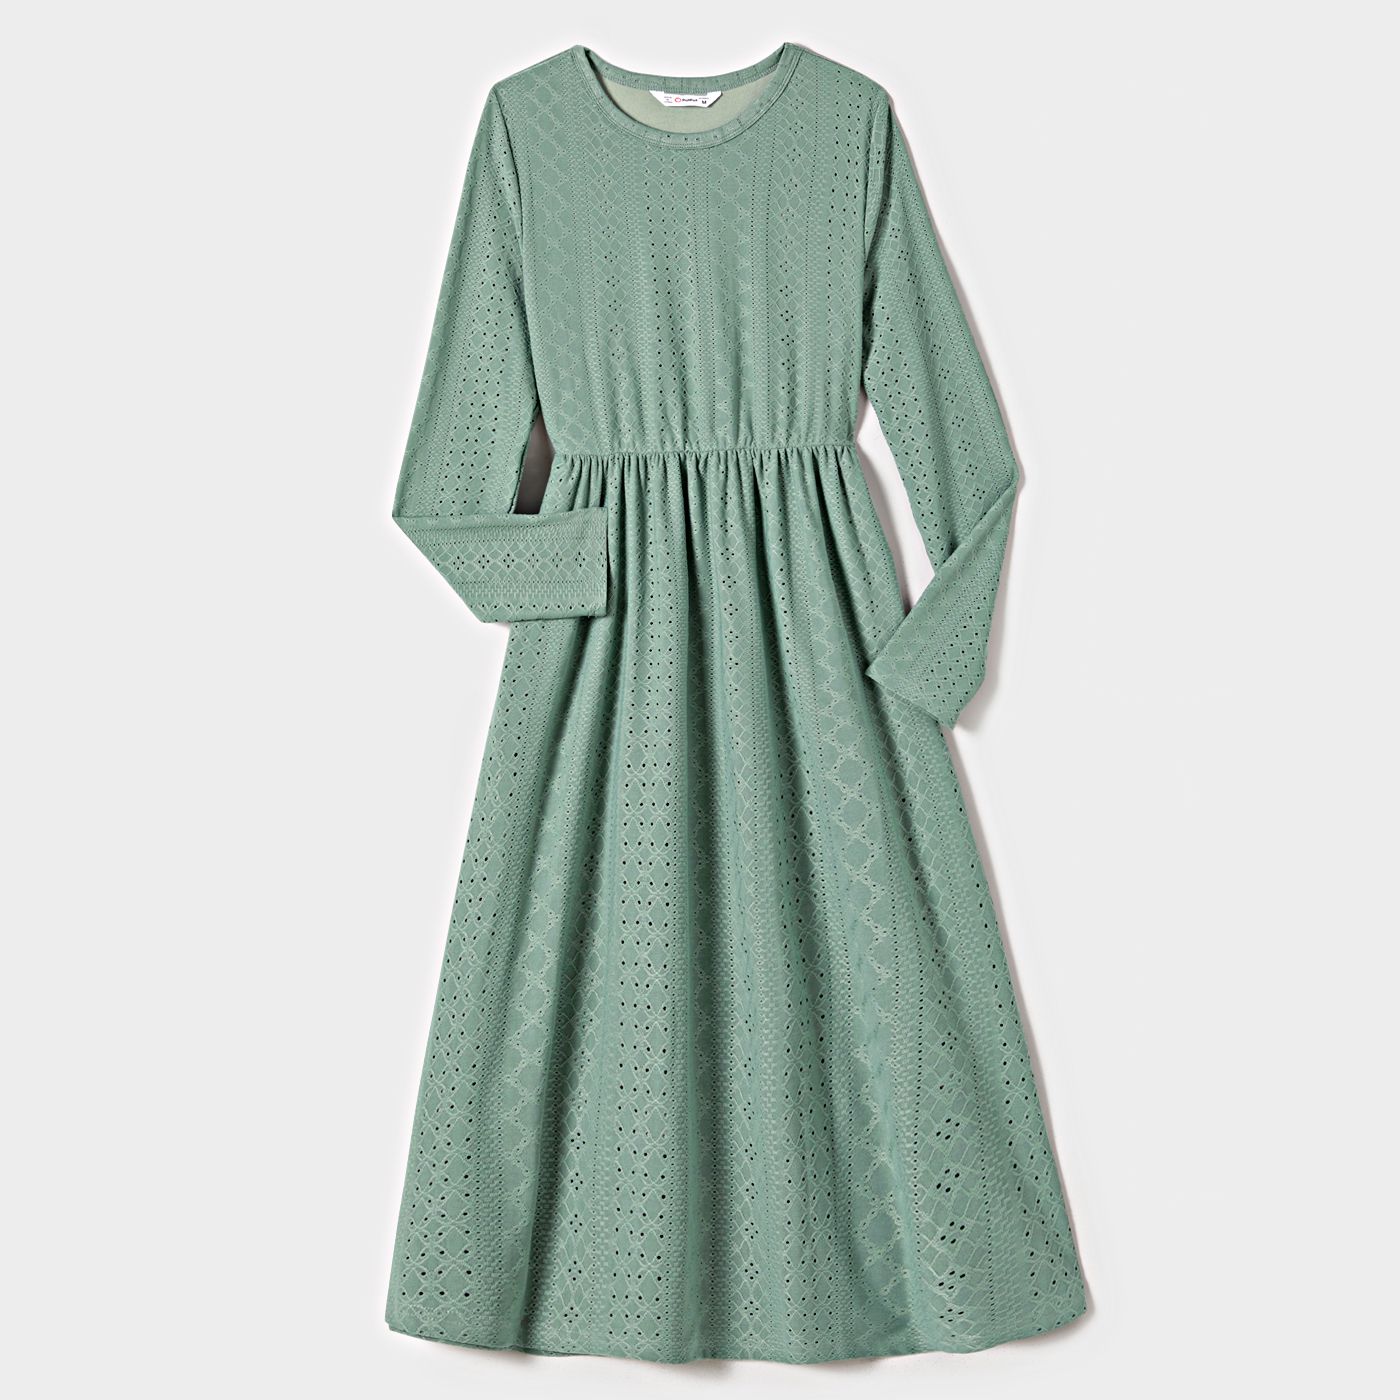 Family Matching Mint Green Lace Dresses And Color-block Long-sleeve Tops Sets